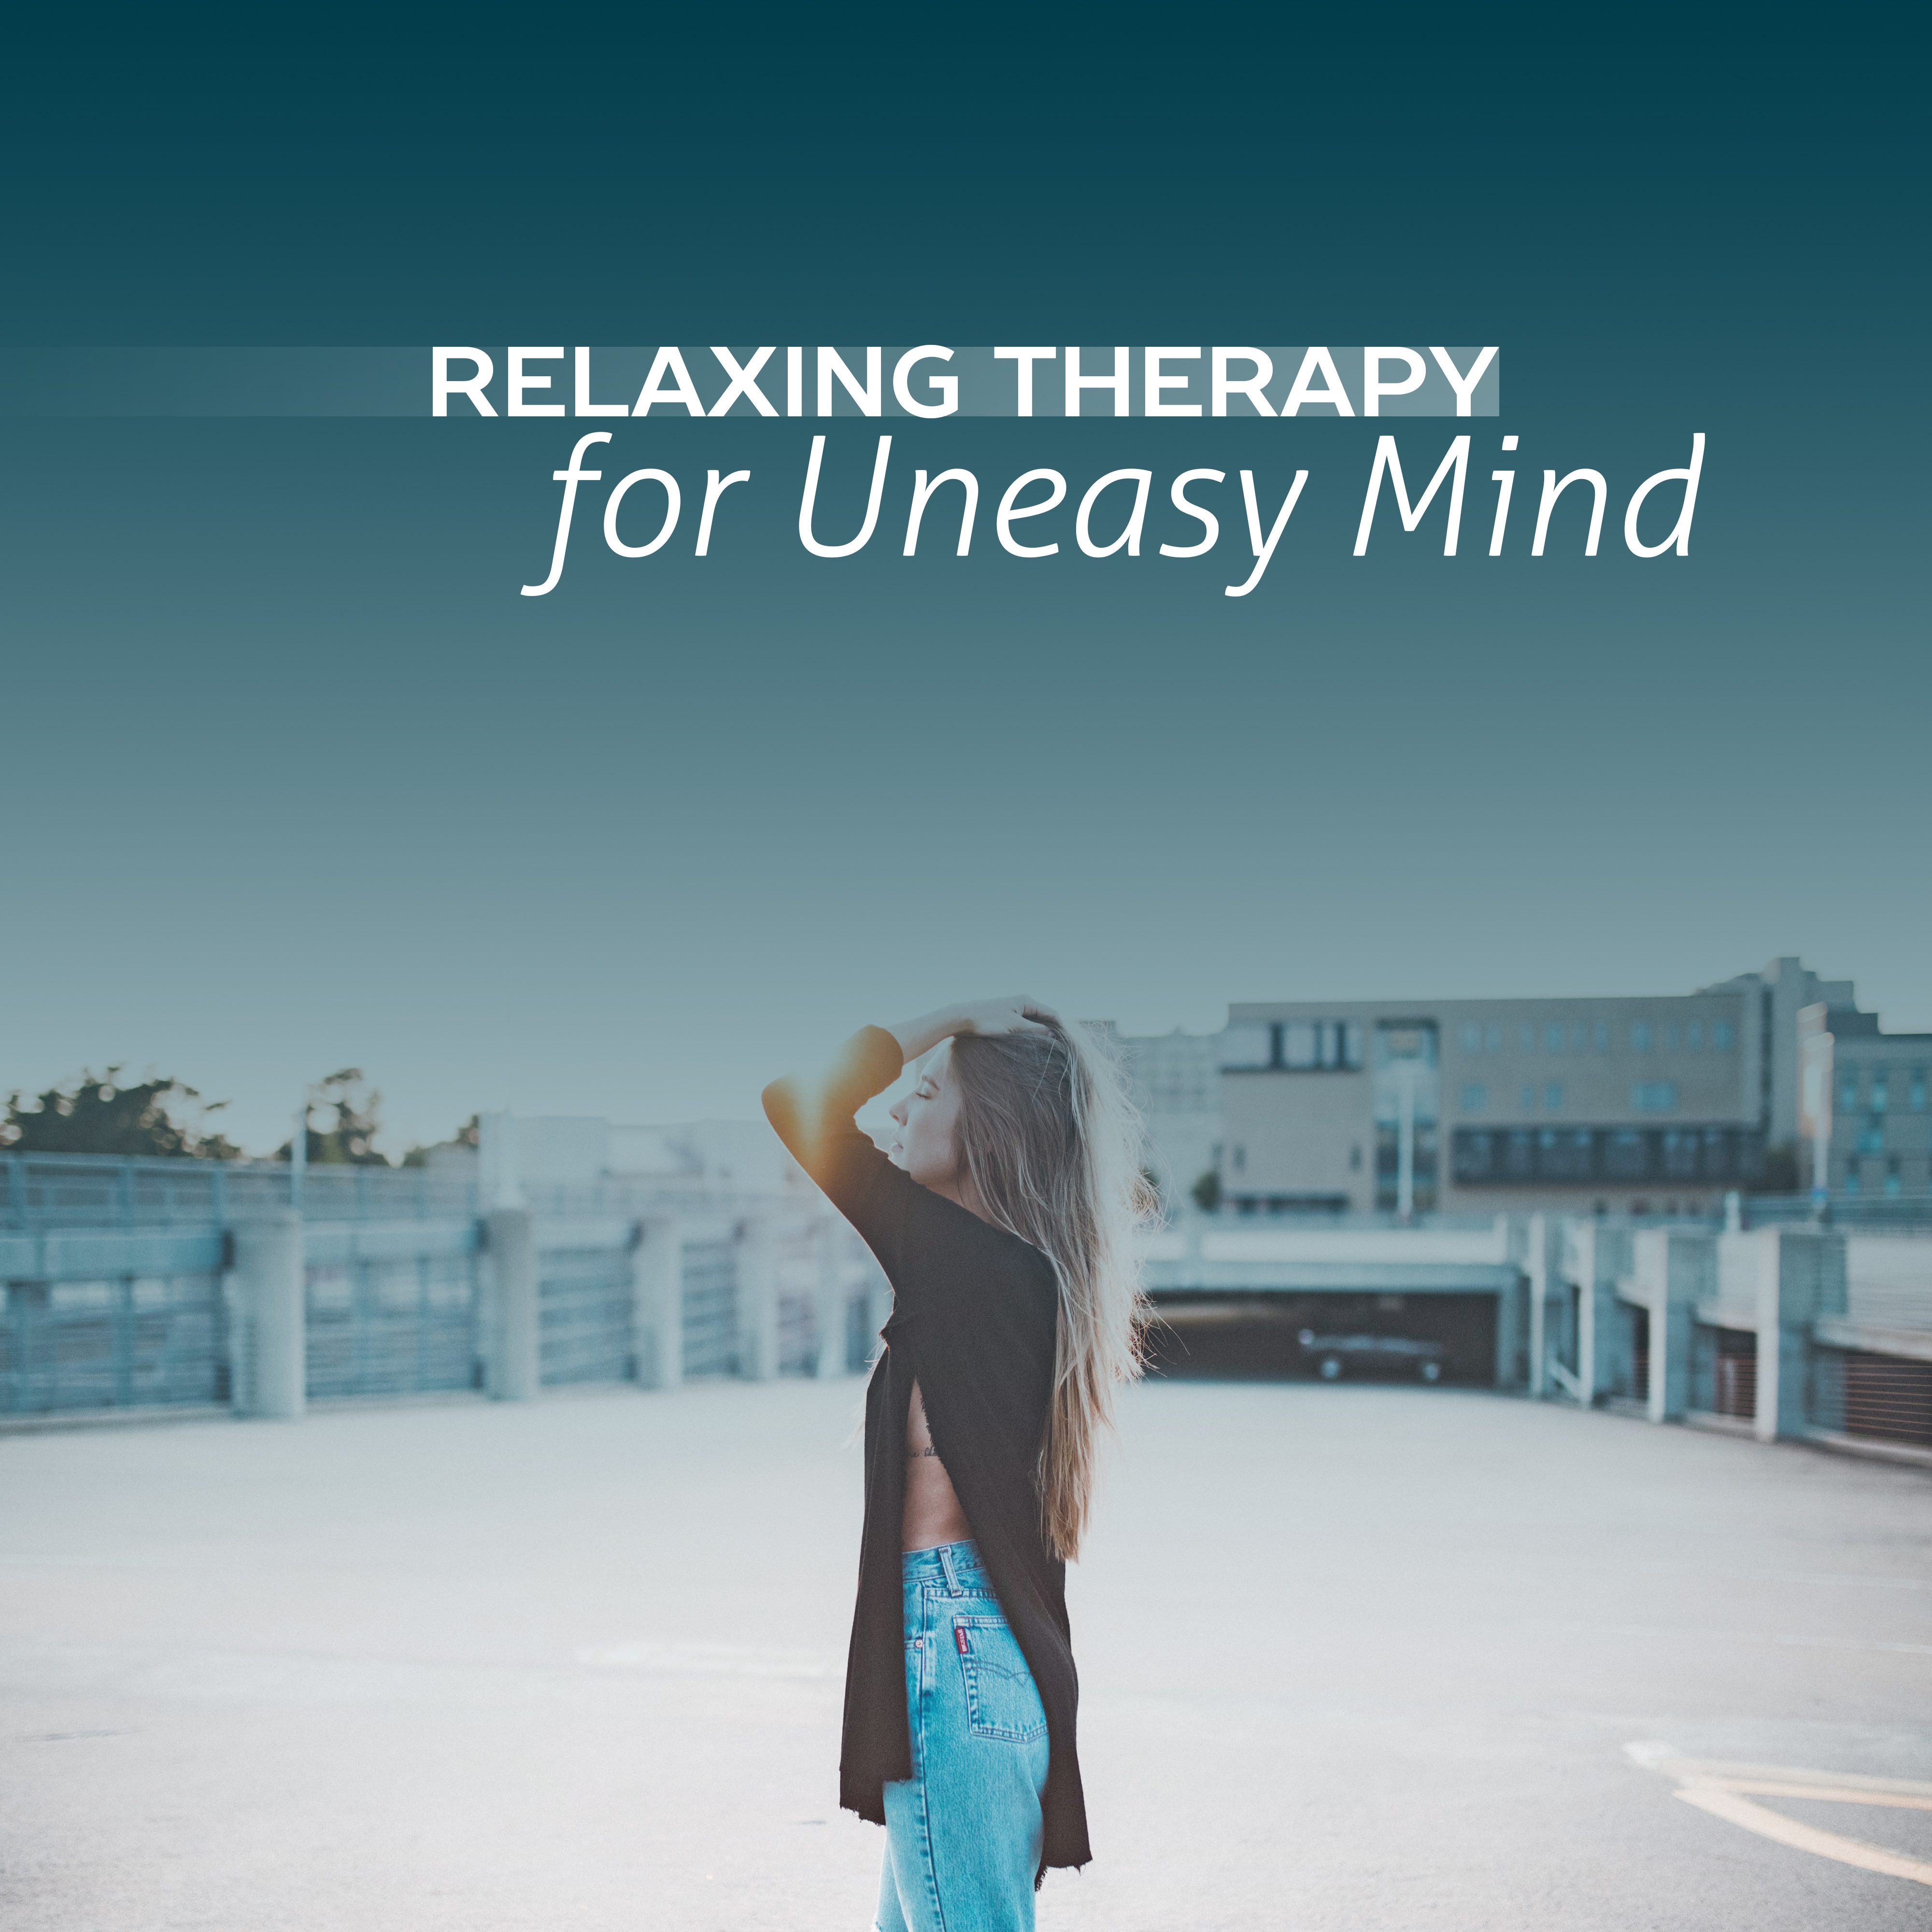 Relaxing Therapy for Uneasy Mind – Chill Out Music, Calmness, Gentle Sounds to Rest, Morning Meditation, Relax Under Palms, Beach Chill